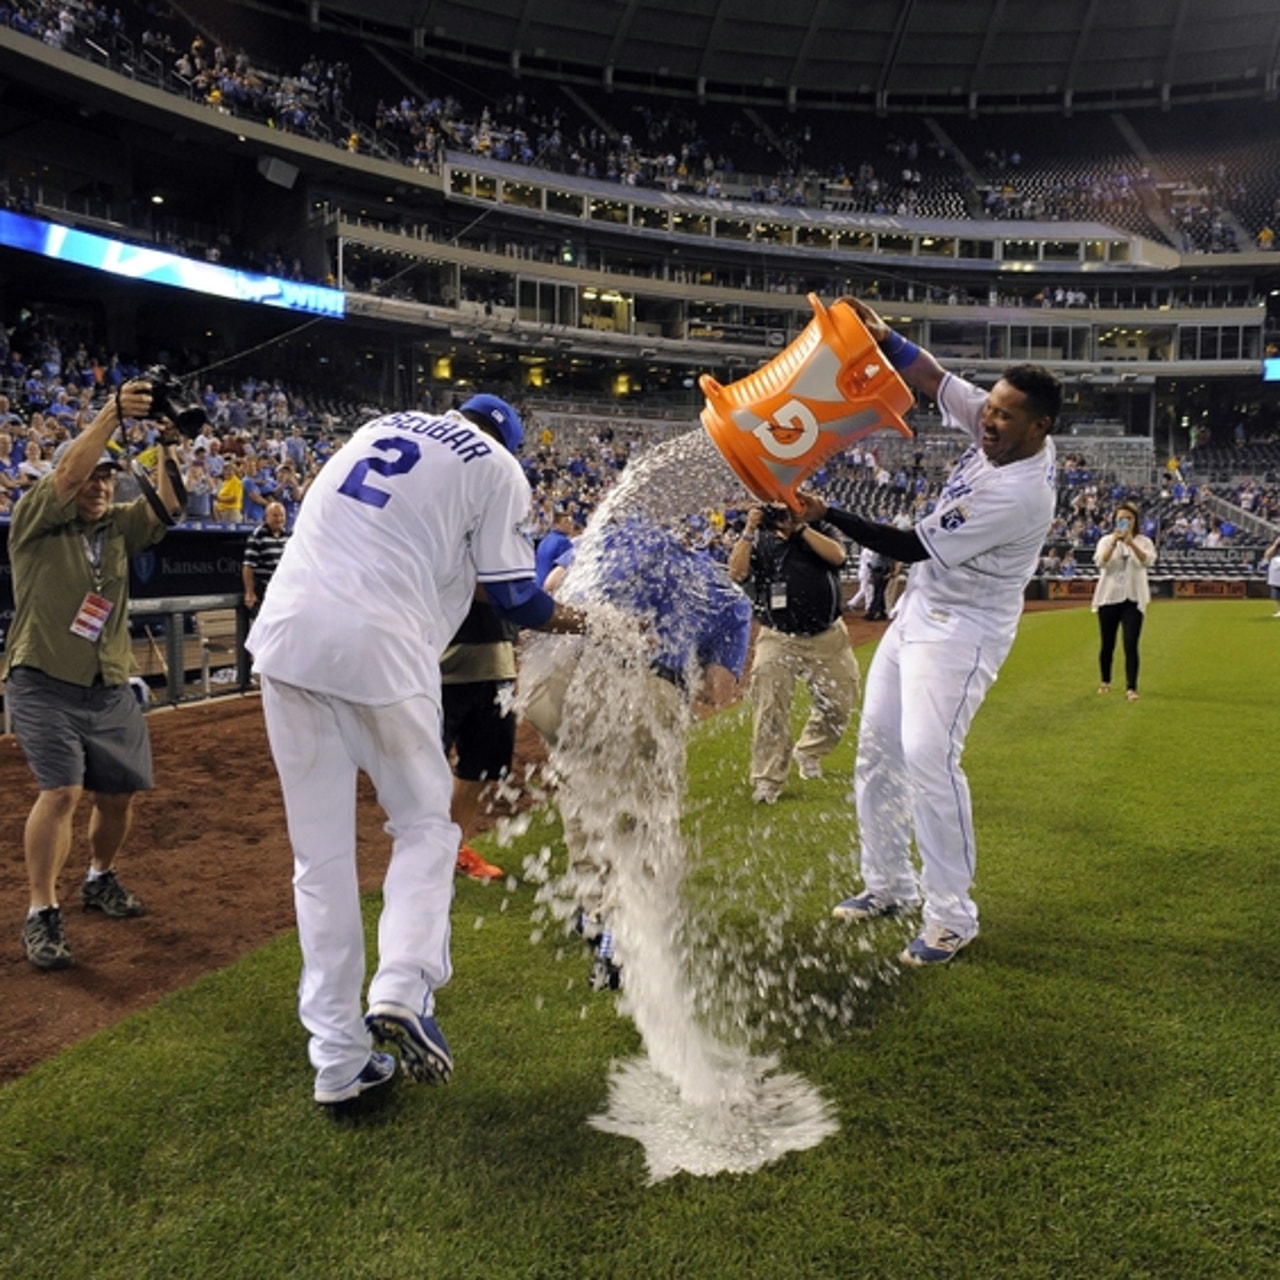 Salvy, Whit represent Royals as American League wins eighth-straight All- Star Game